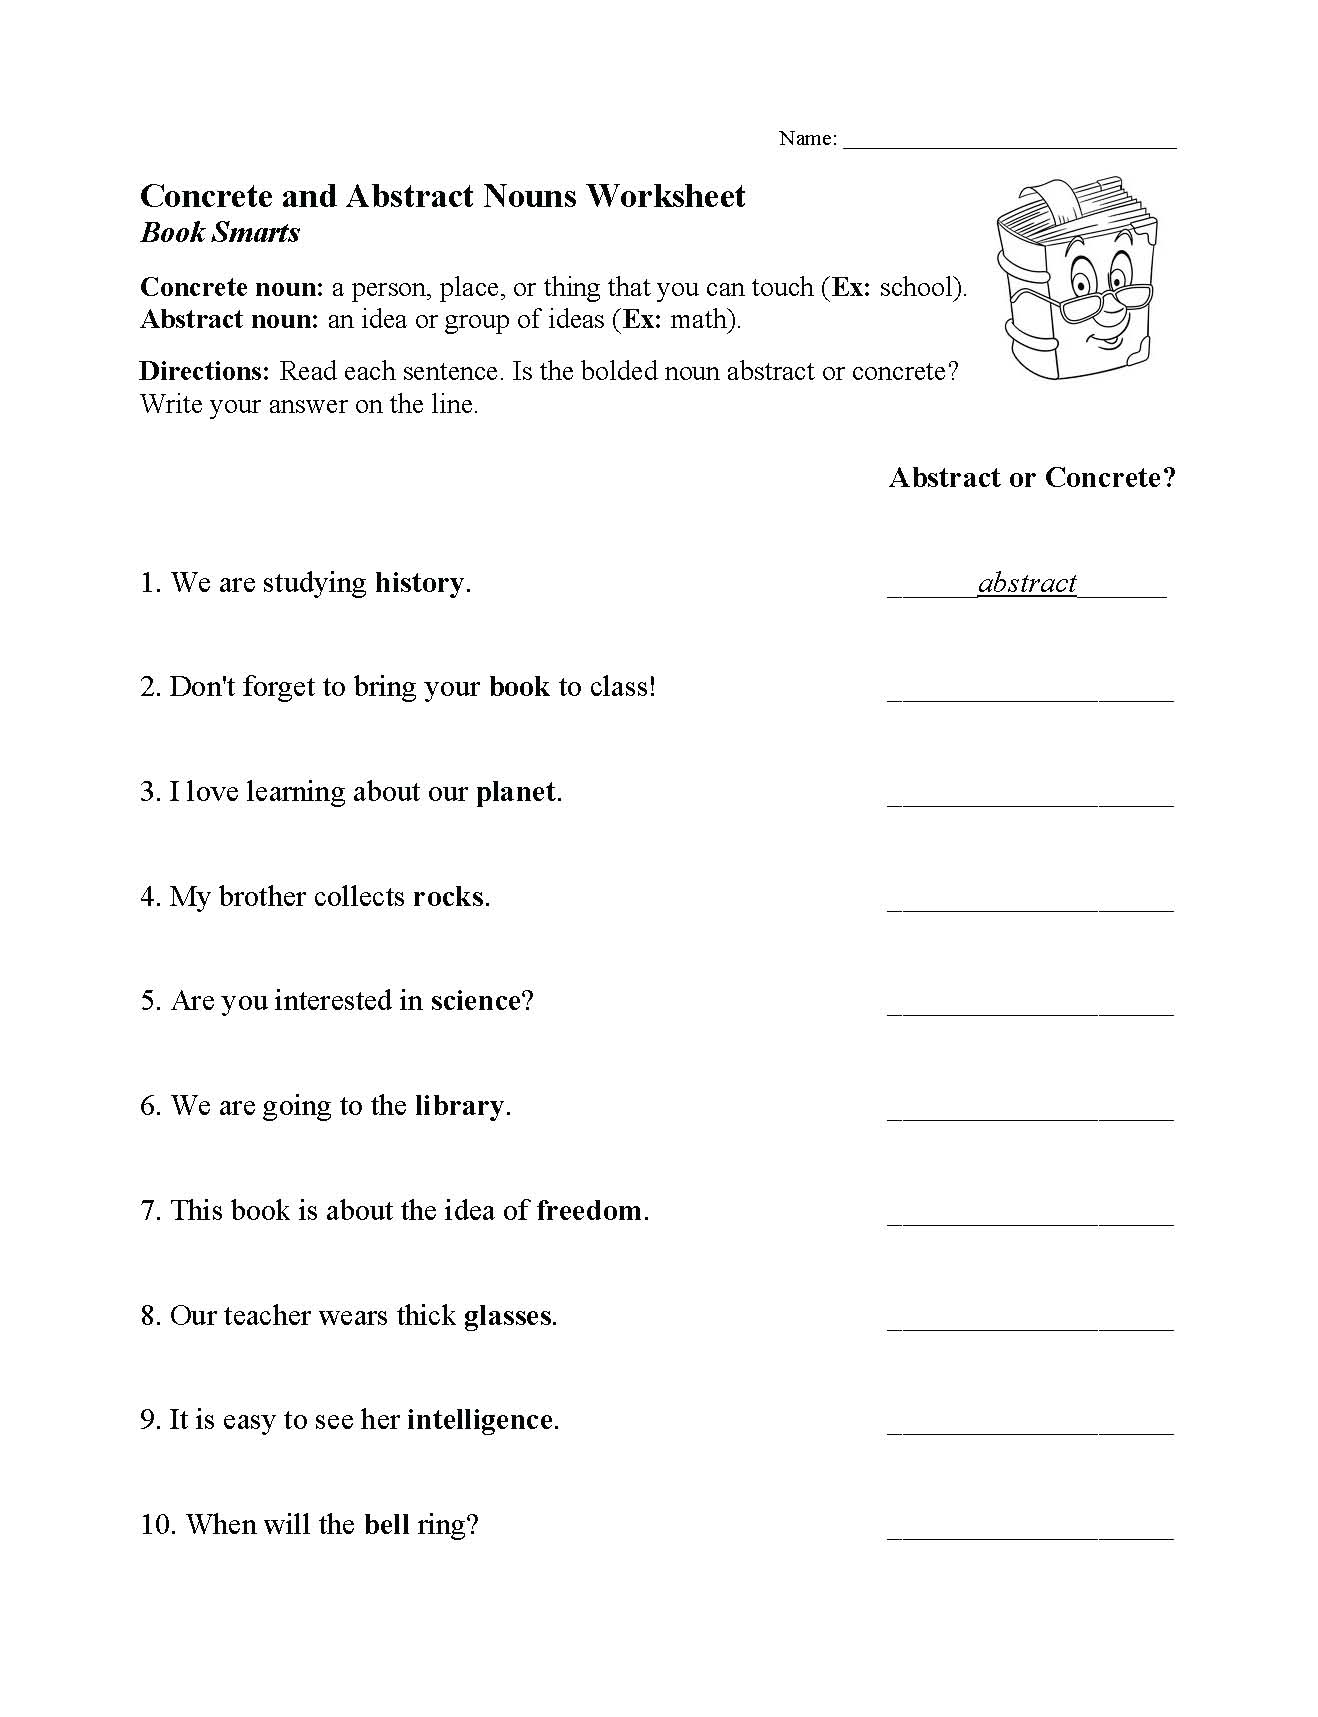 Concrete And Abstract Nouns Worksheet Parts Of Speech Activity